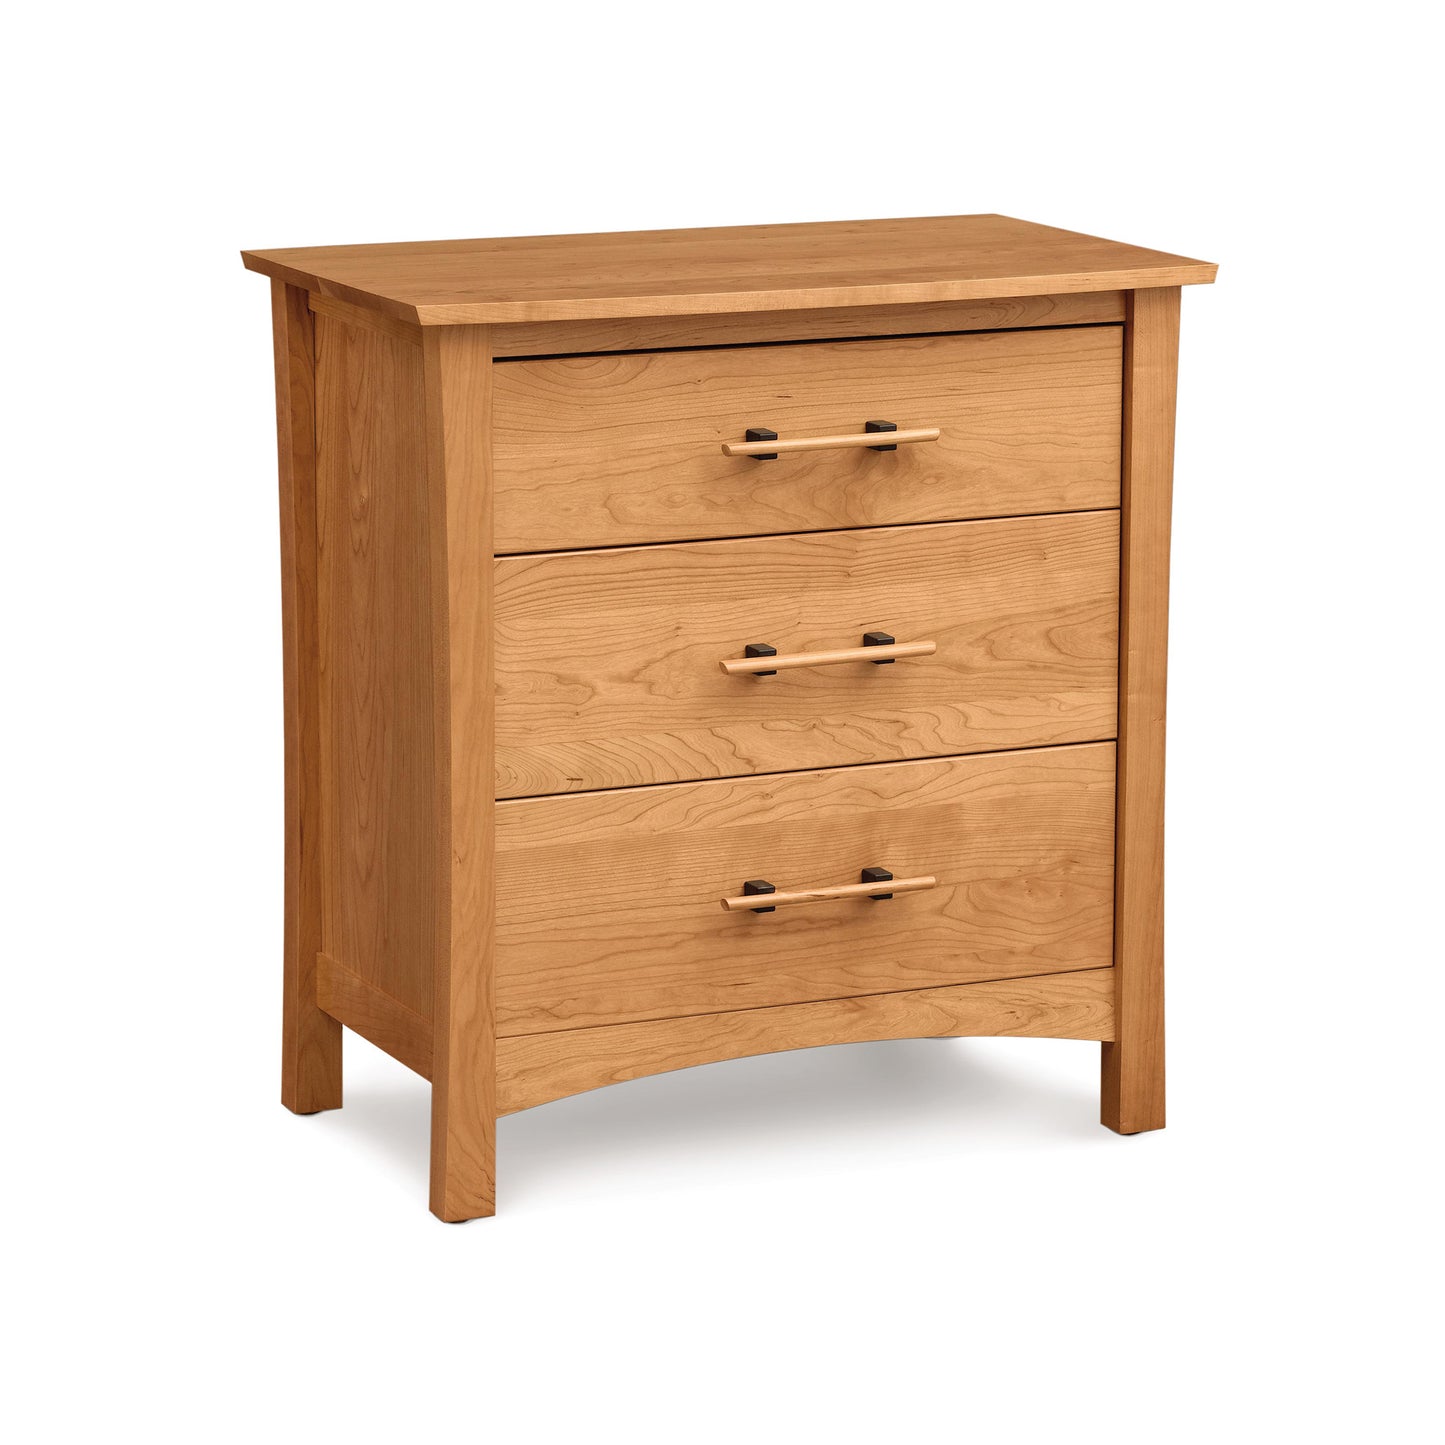 A cherry wood Copeland Furniture Monterey 3-Drawer Chest on a white background.